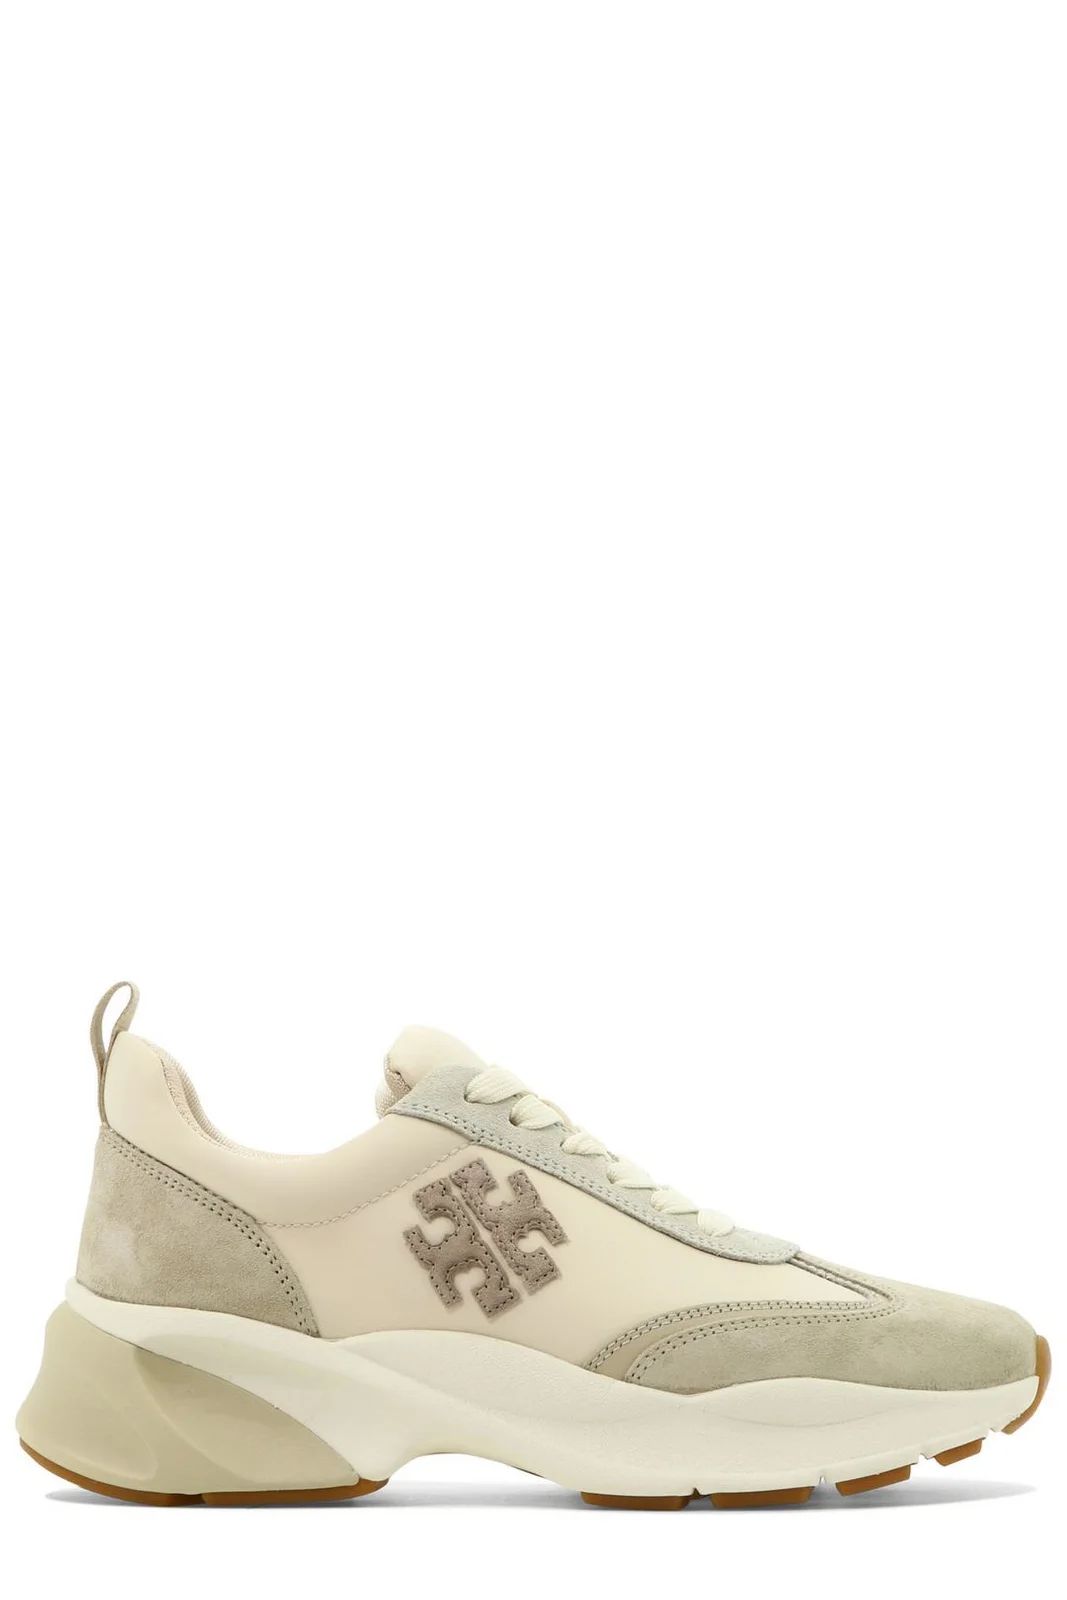 Tory Burch Good Luck Low-Top Sneakers | Cettire Global